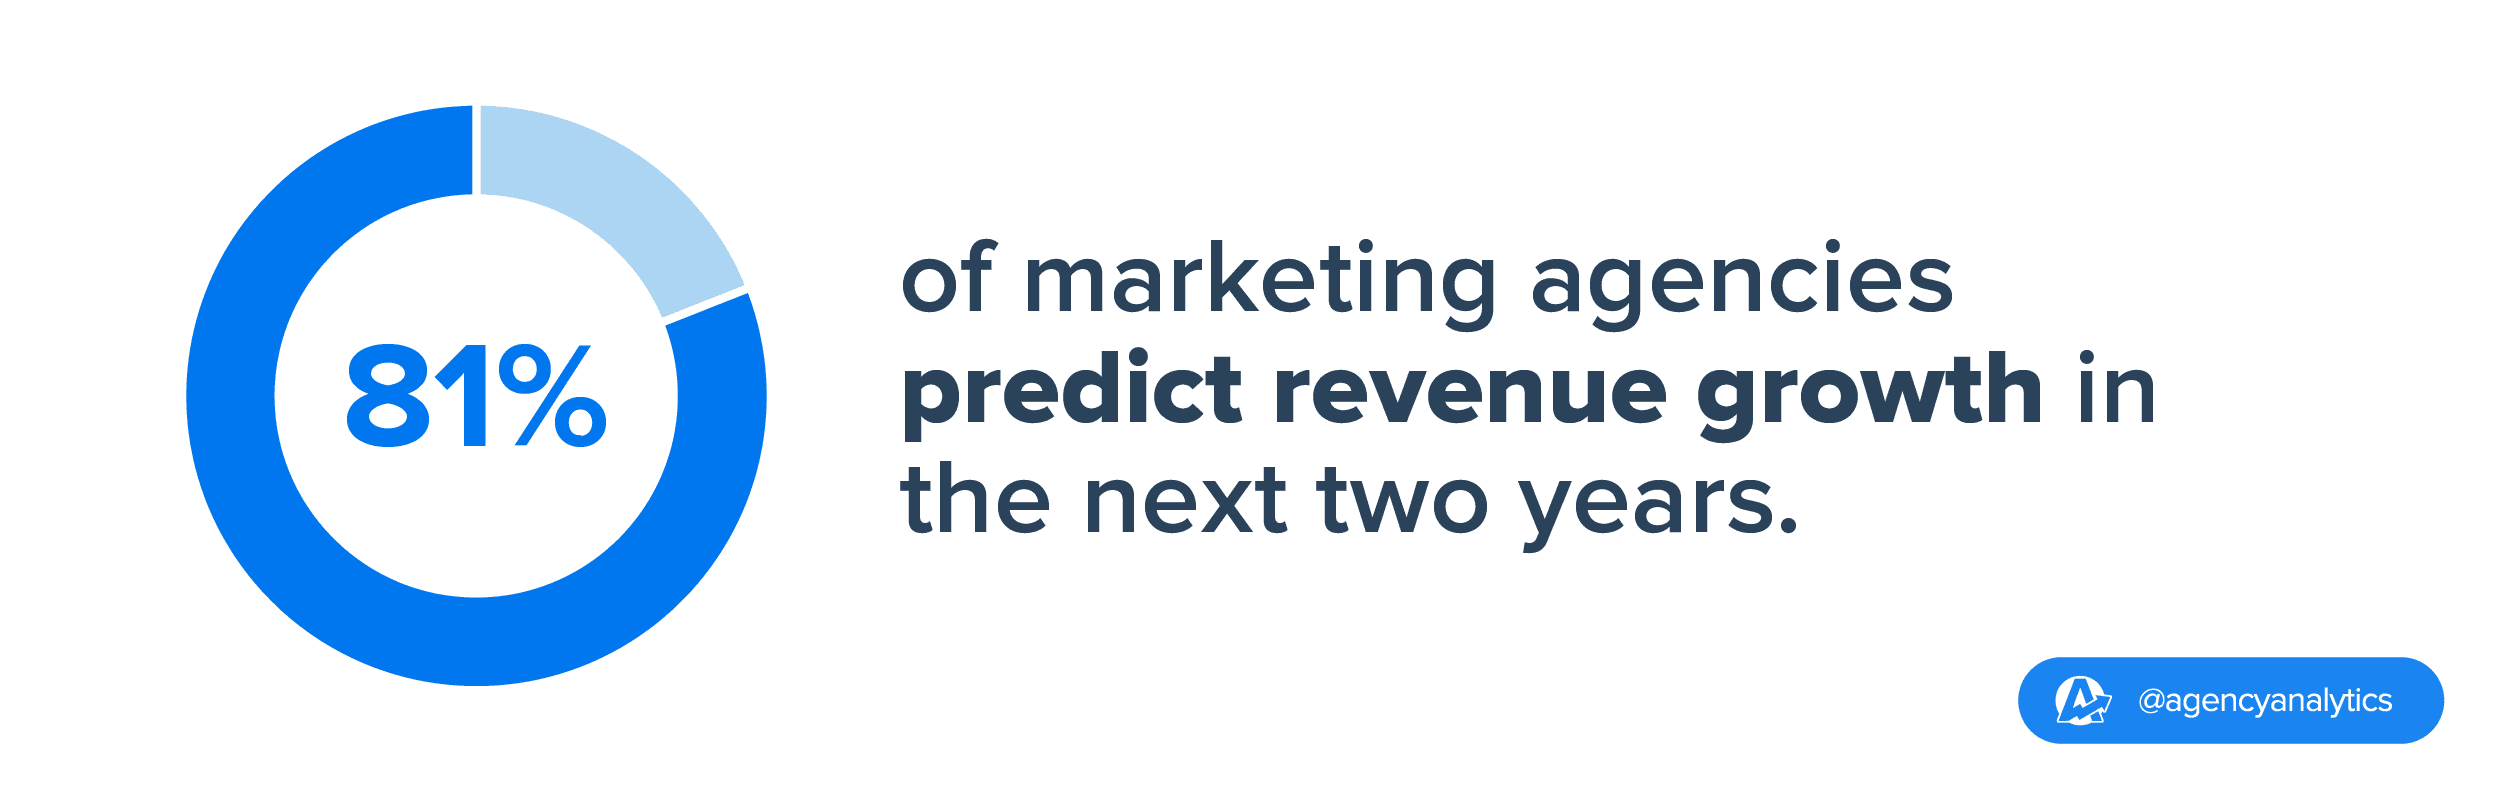 81% of marketing agencies surveyed predict revenue growth in the next two years